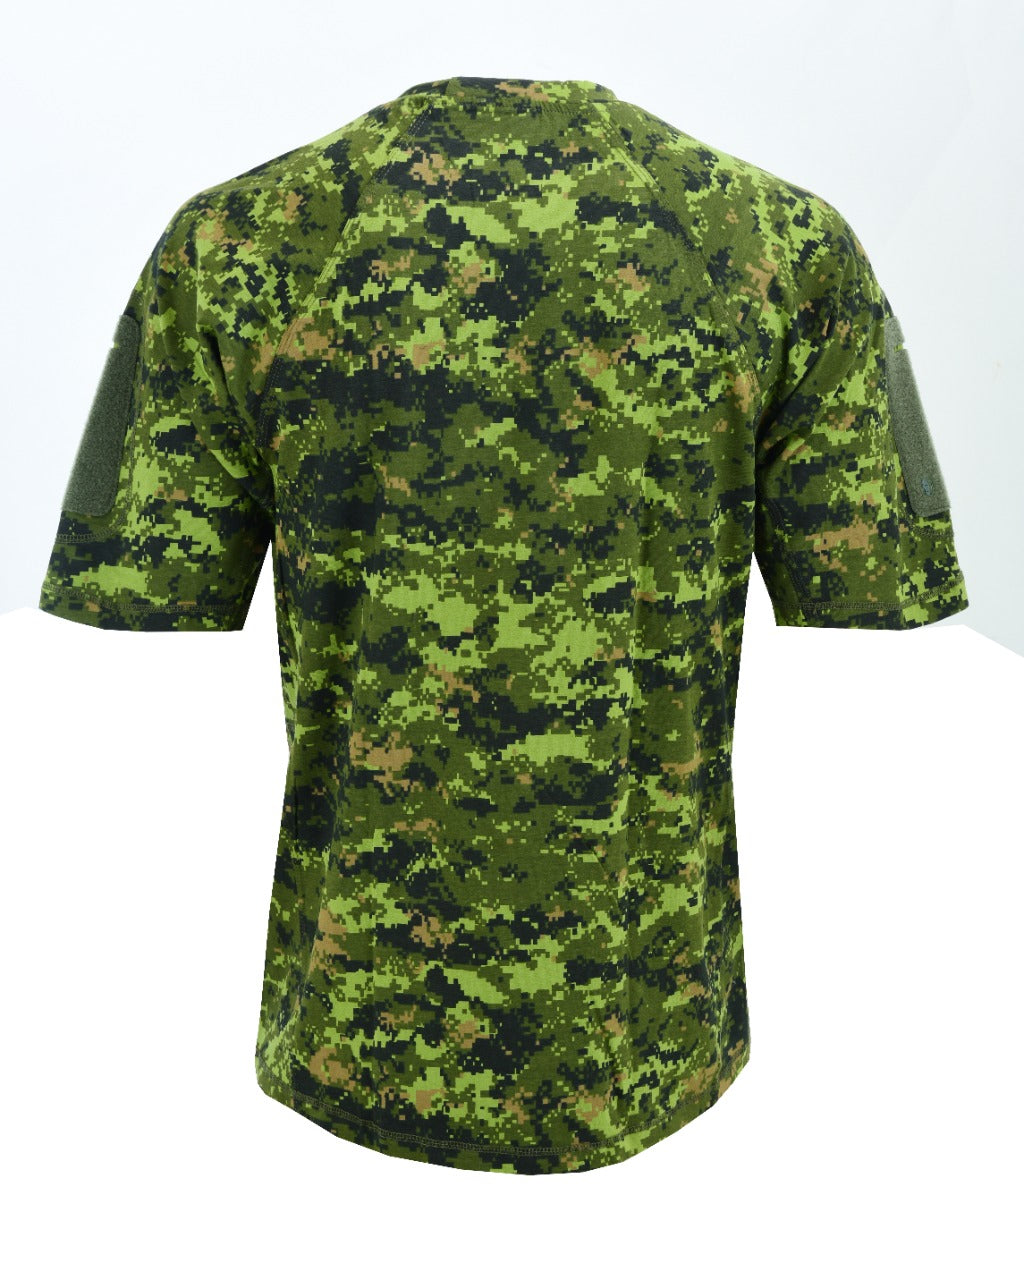 Tactical Zone instructor shirt in CadPat Camo back